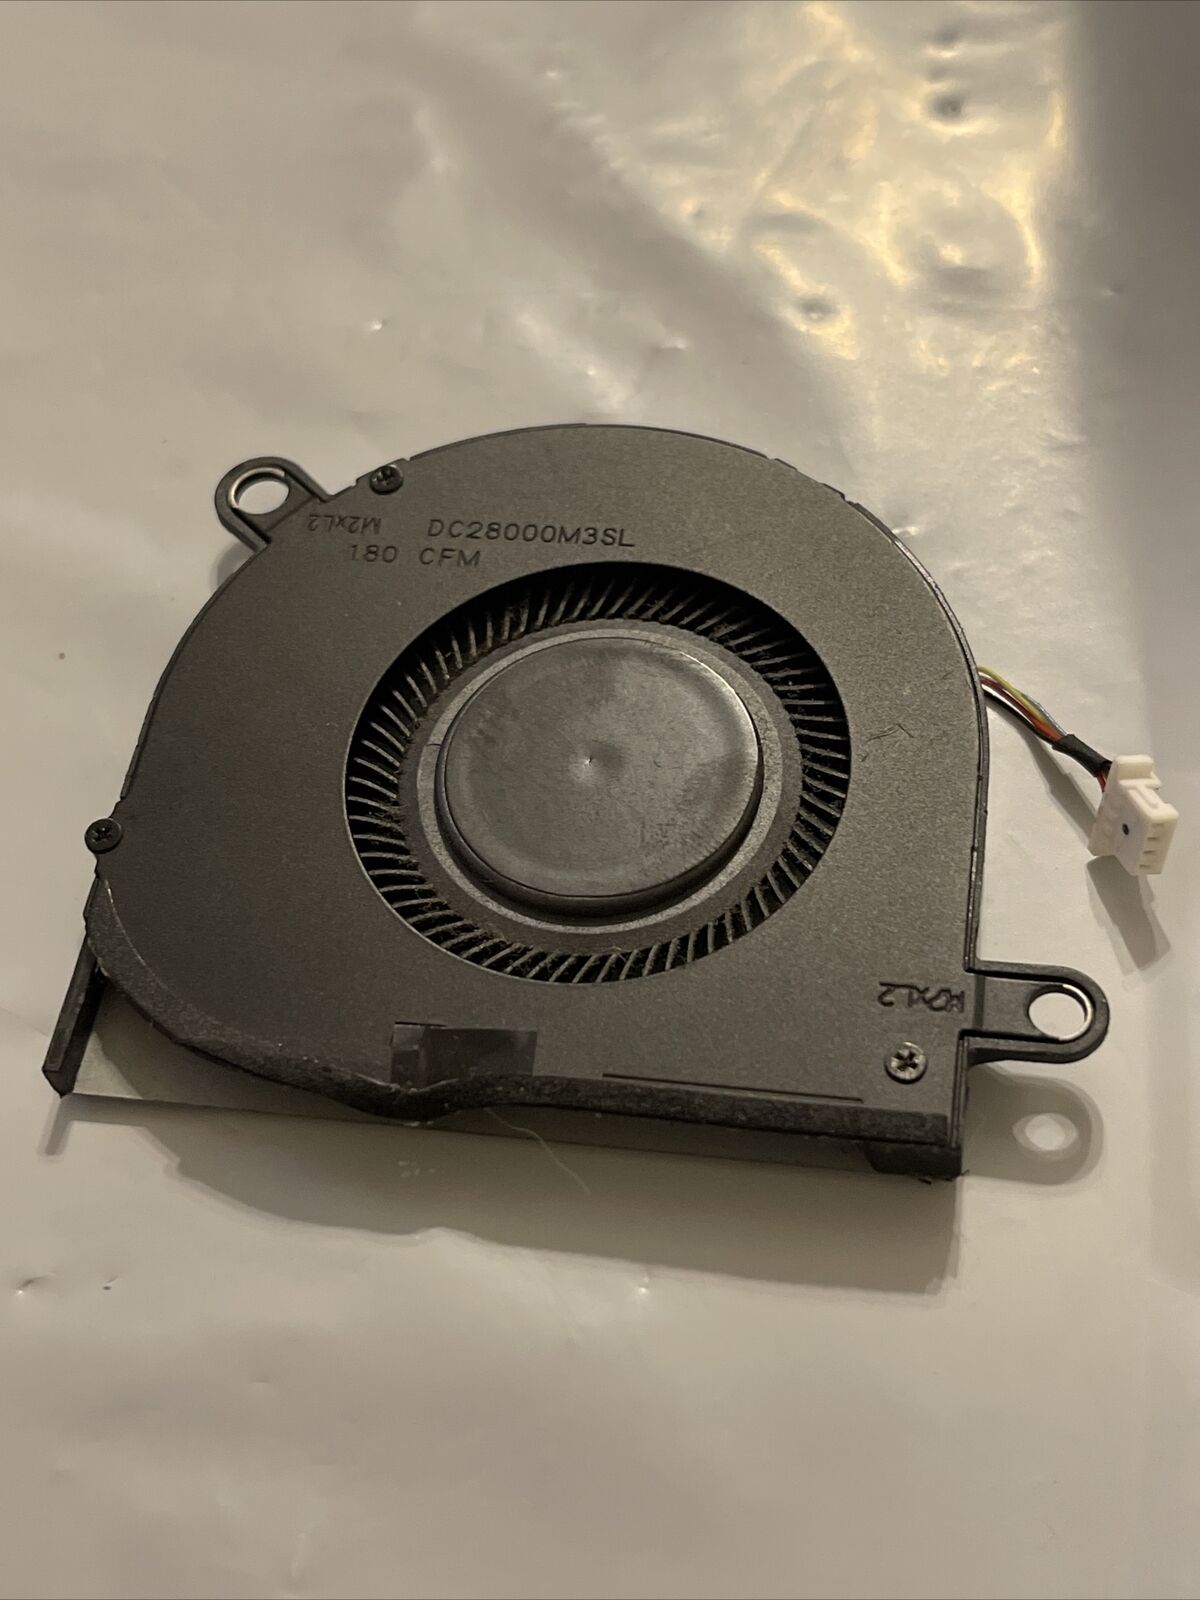 Dell OEM Latitude 7400 2-in-1 CPU Cooling Fan 9D1T8 09D1T8